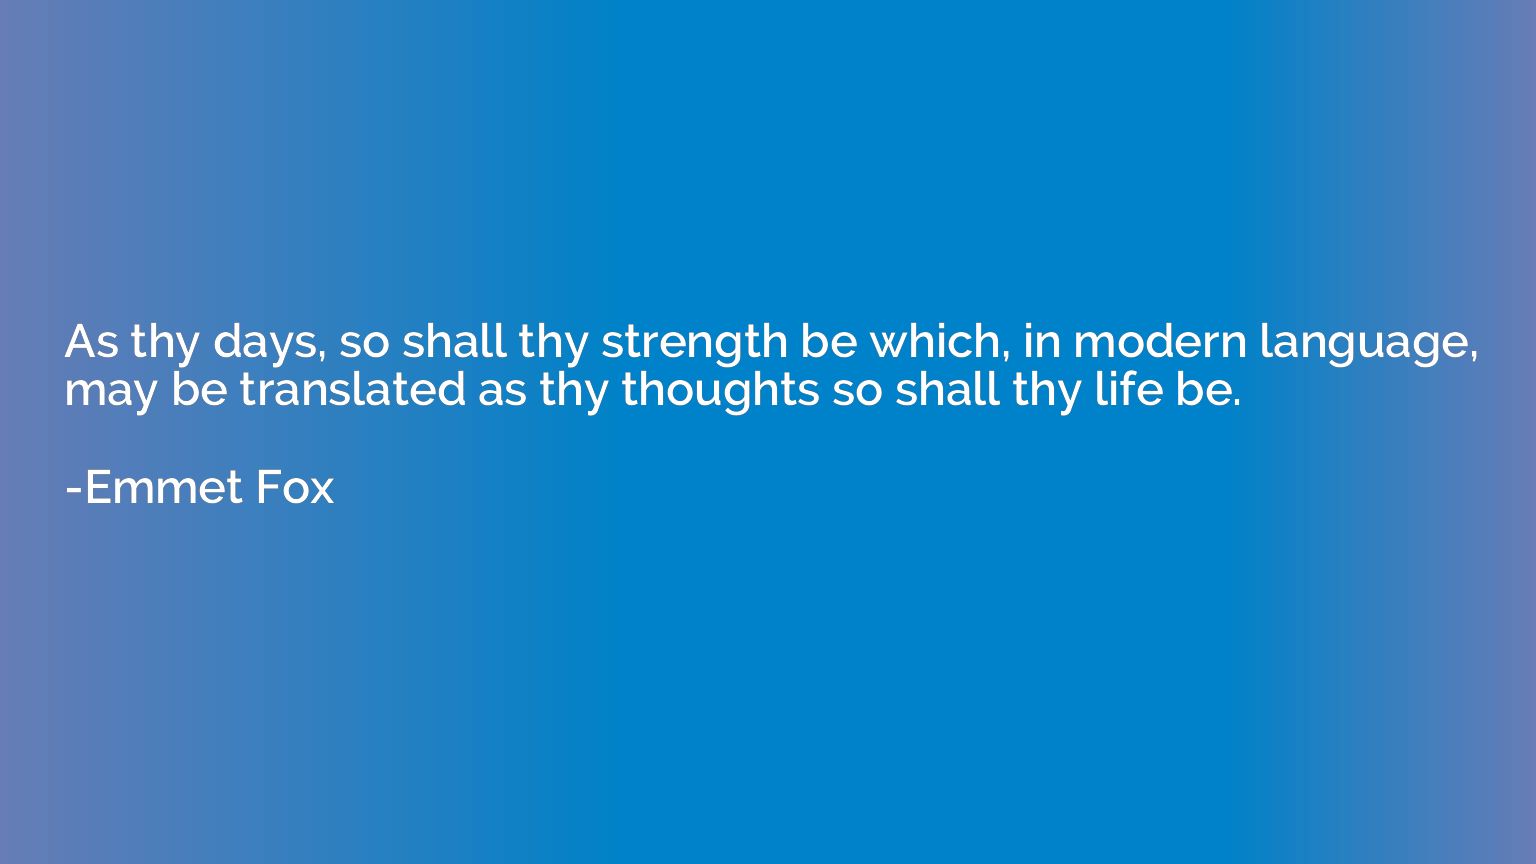 As thy days, so shall thy strength be which, in modern langu